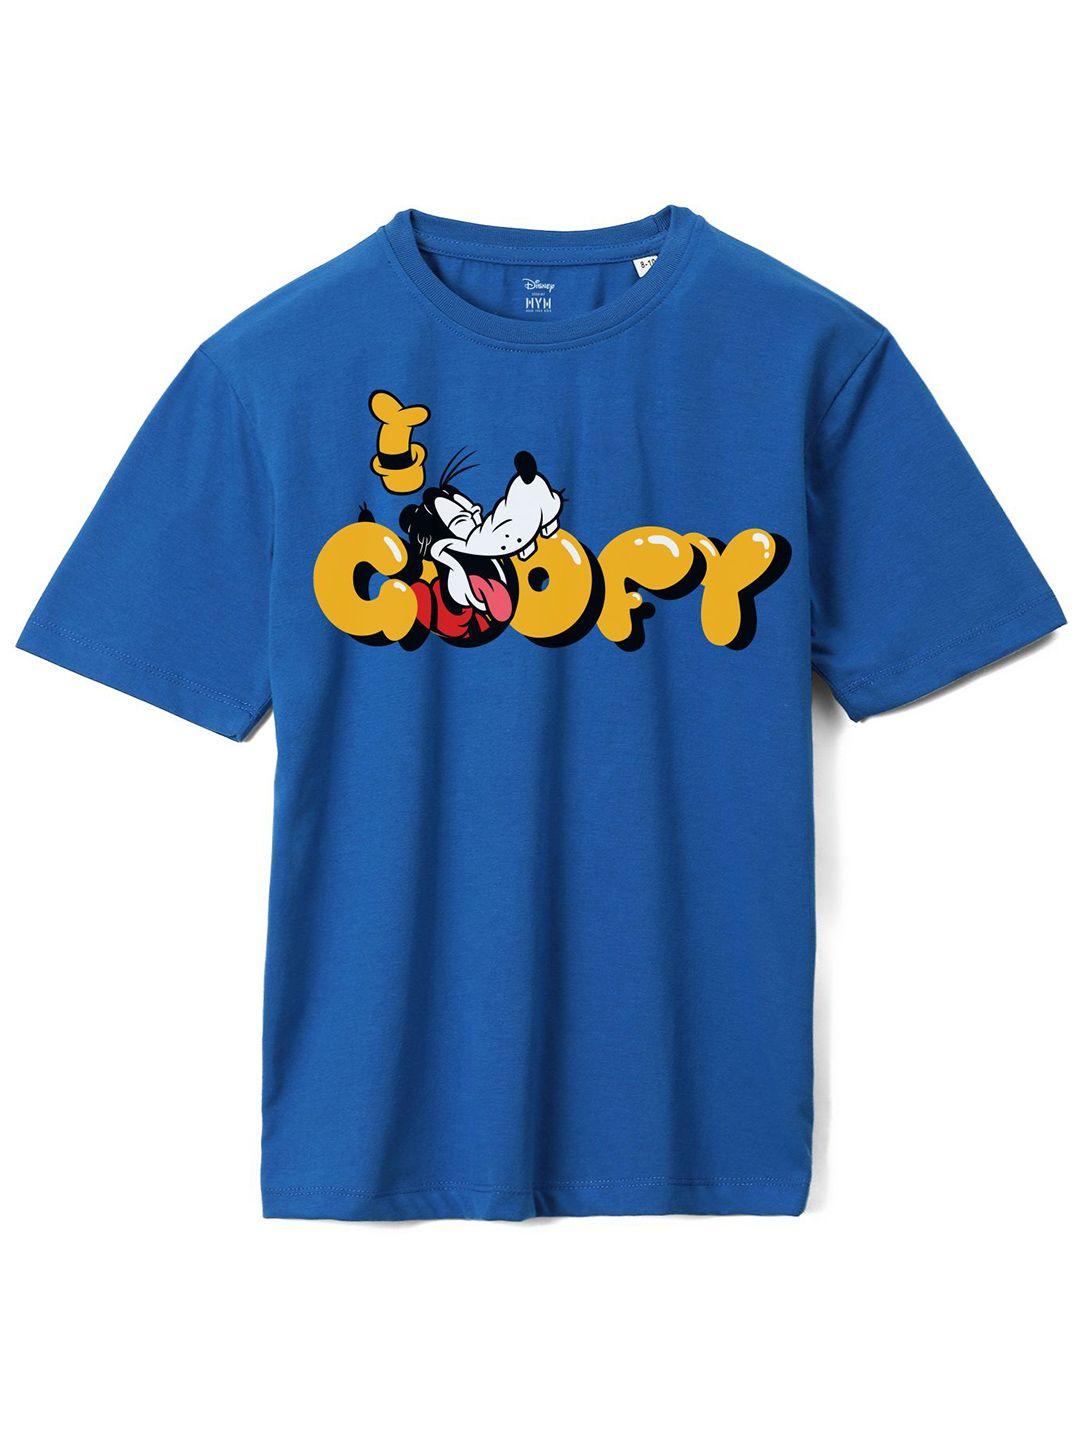 wear your mind boys goofy printed pockets loose cotton t-shirt